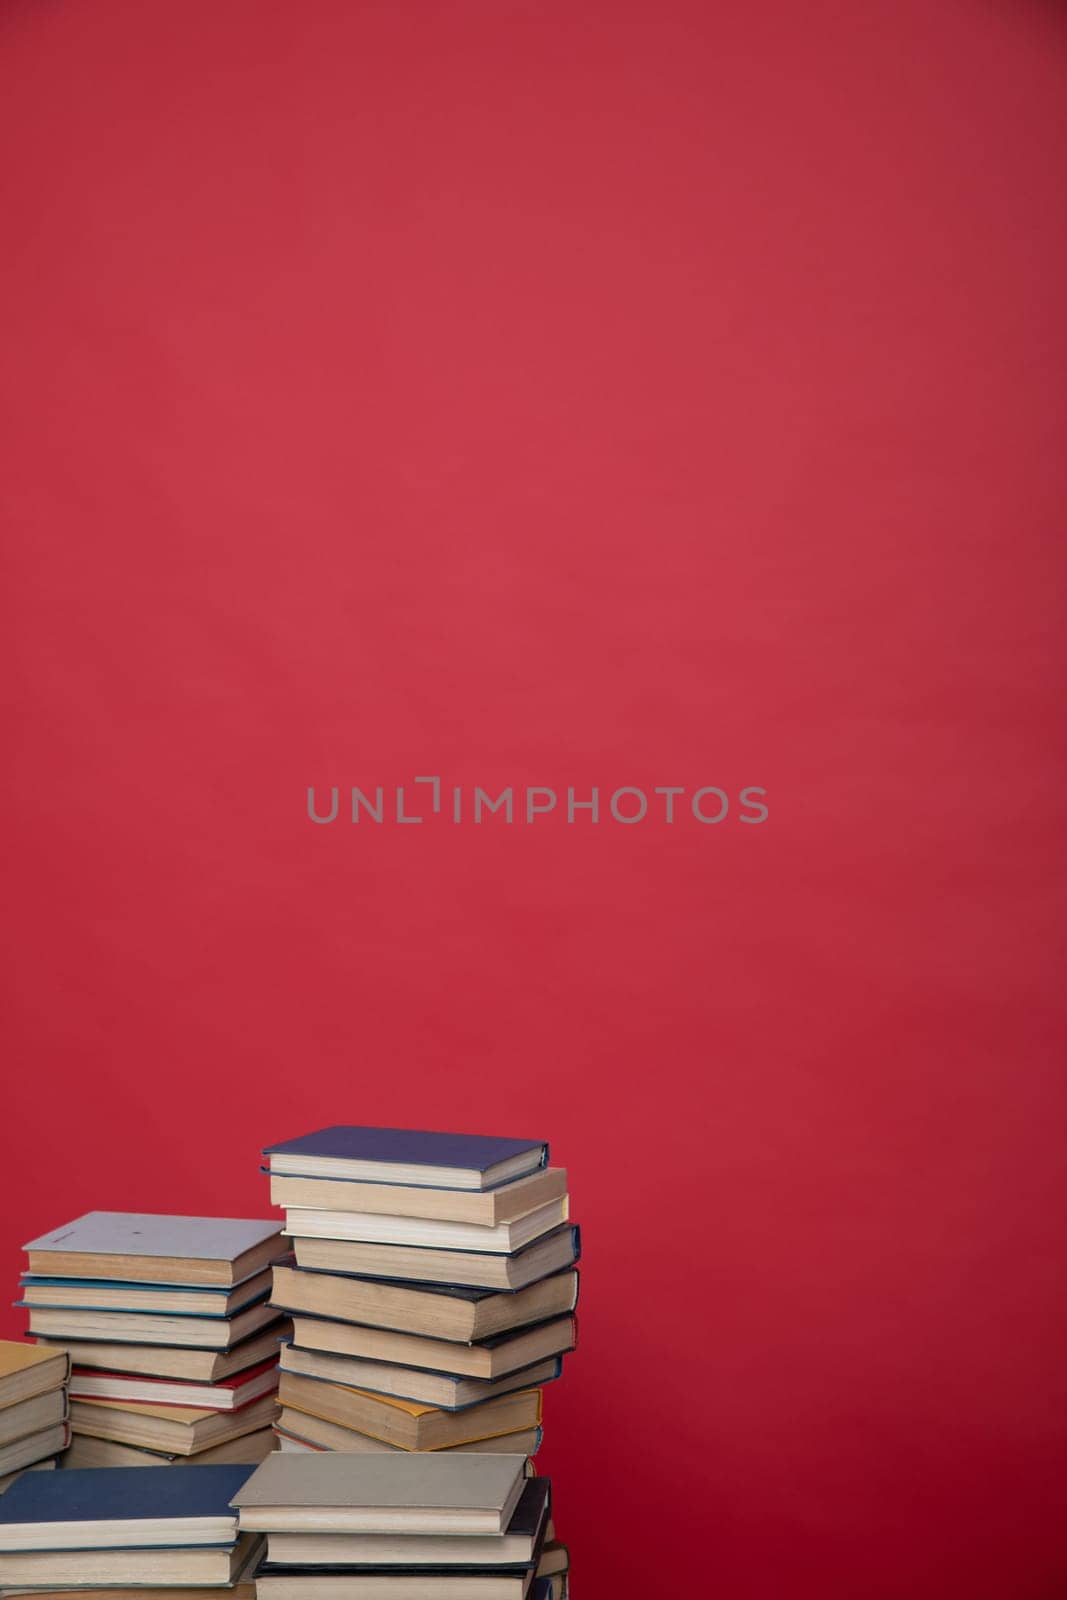 an education science learning library stack of books on a red background